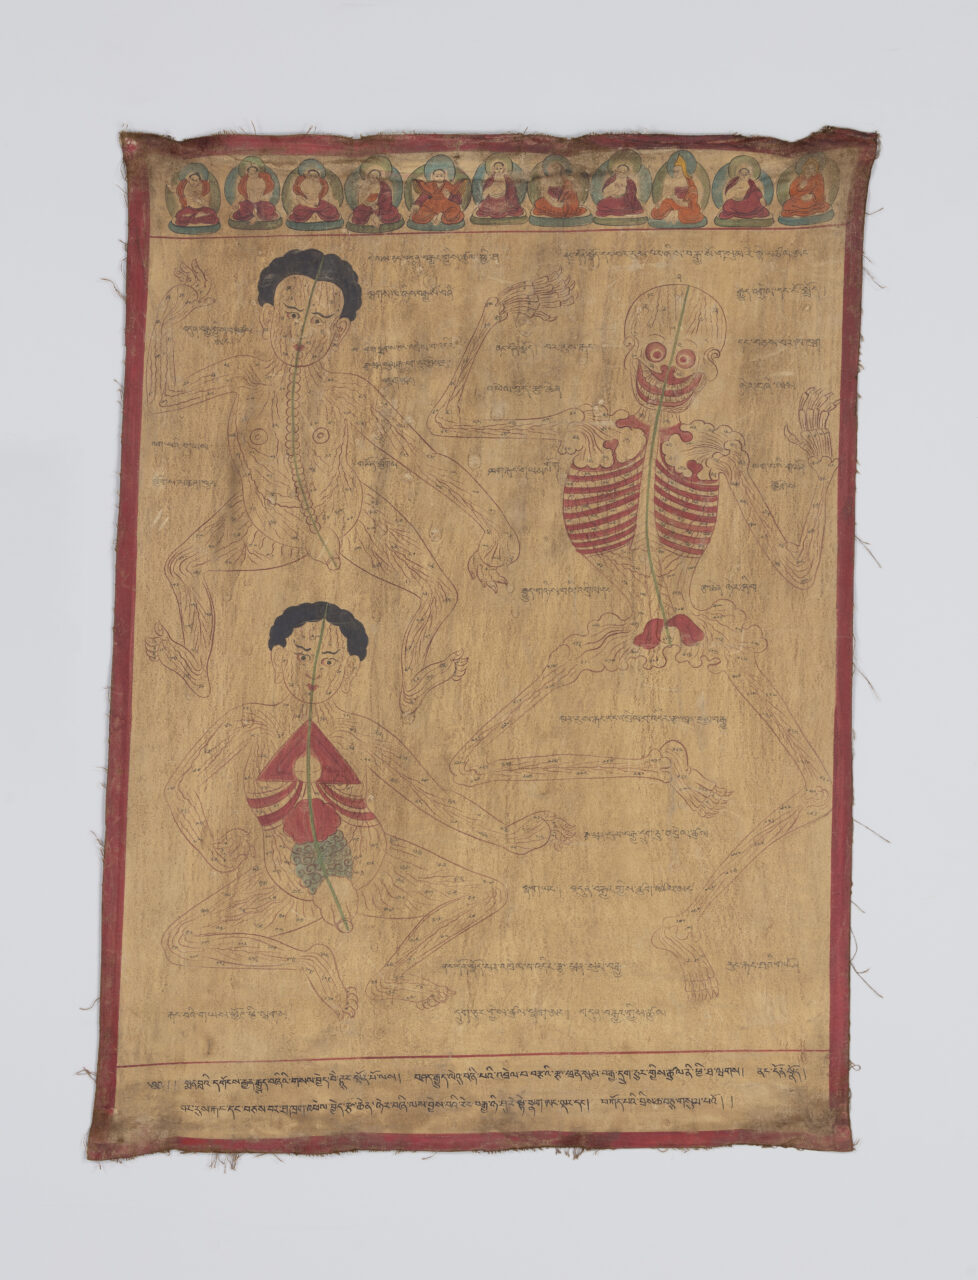 Painting on beige textile depicting three full-body anatomical studies featuring écorché at right